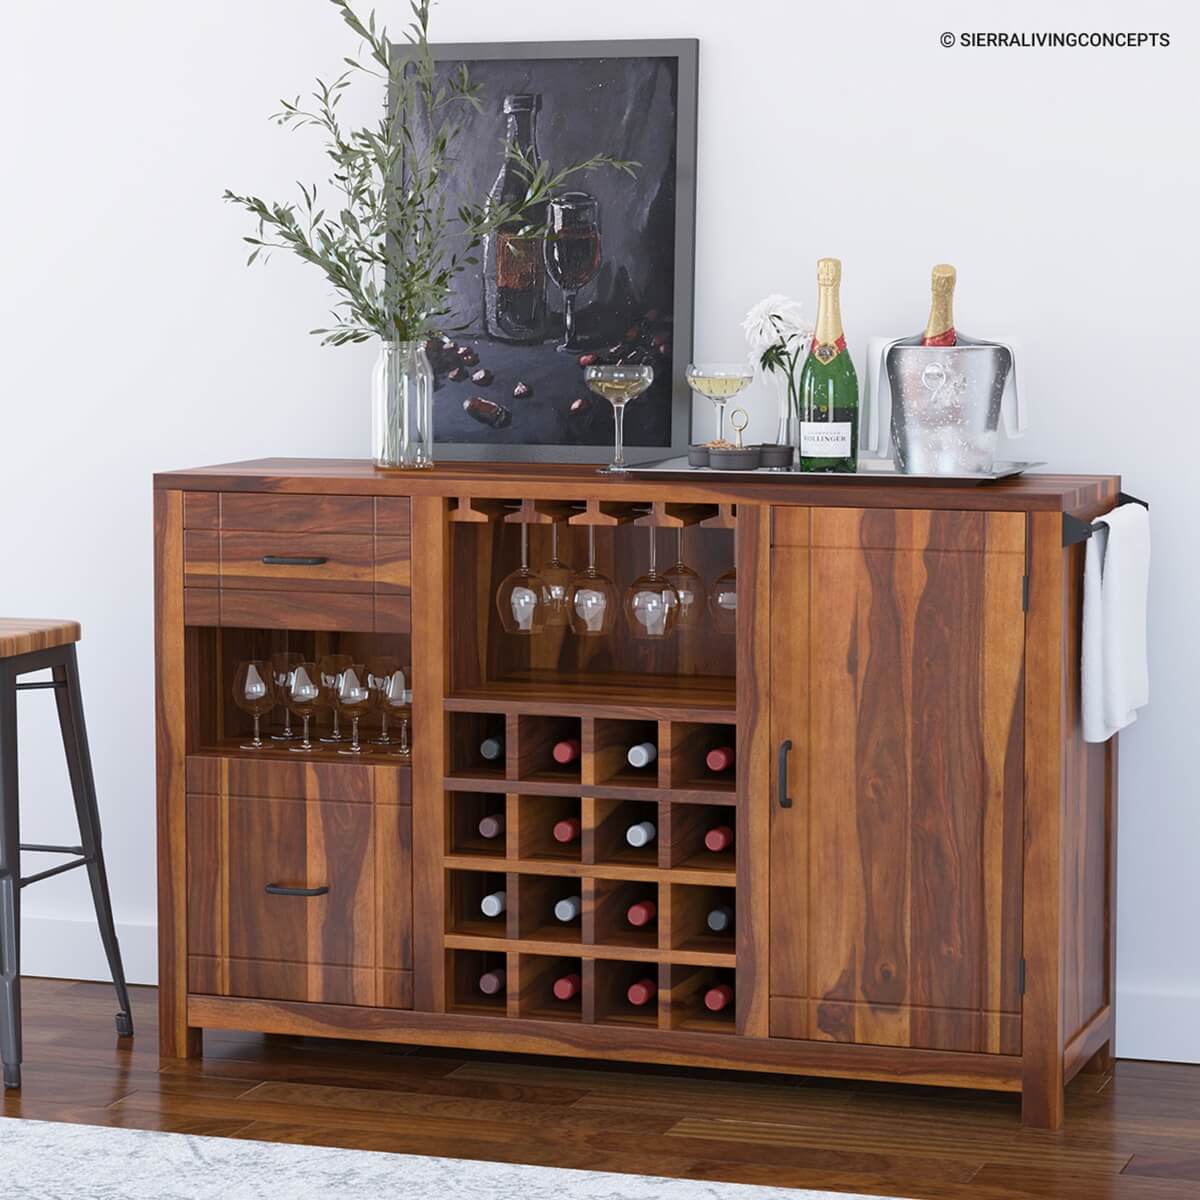 Mancos Rustic Solid Wood Modern Bar Cabinet With Slide Out Drawer